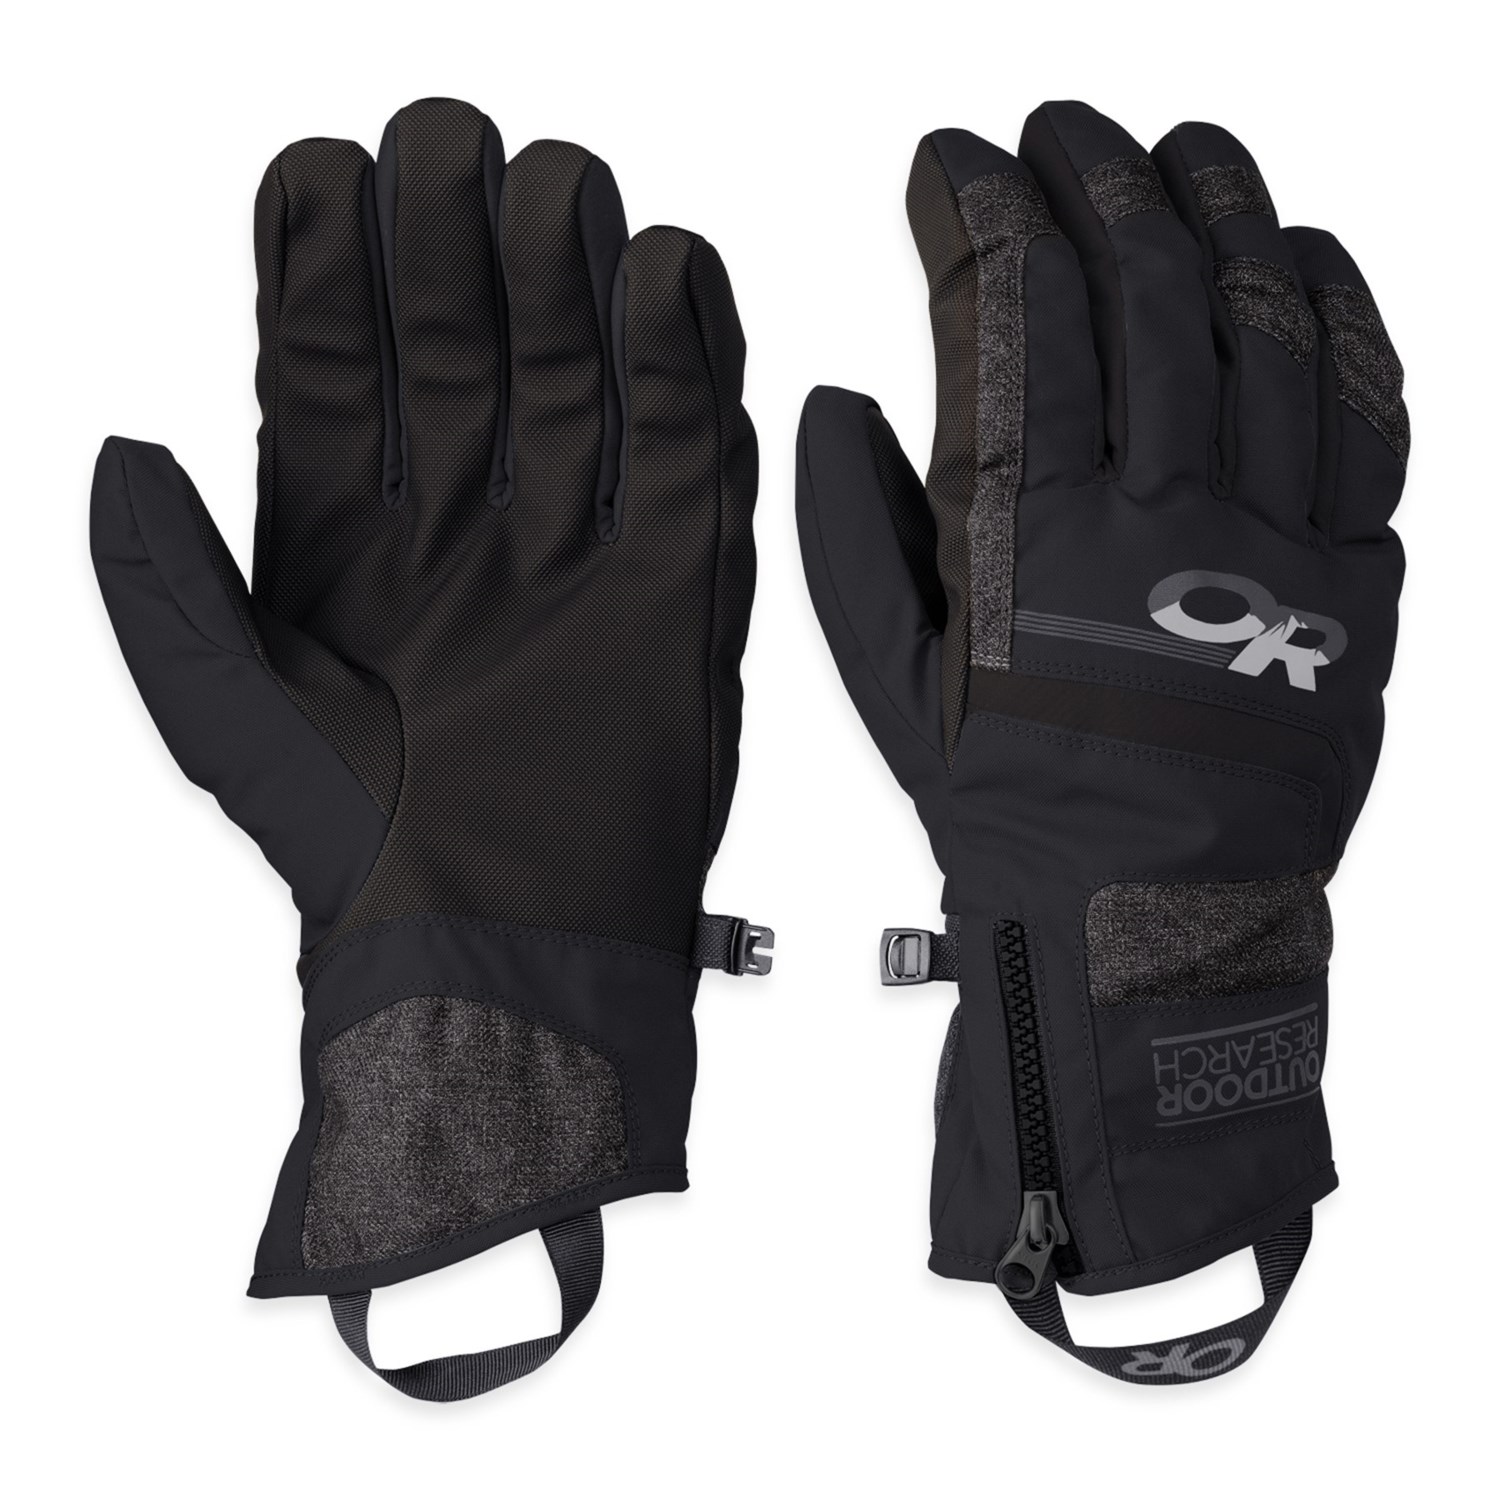 Outdoor Research Riot Gloves (For Men) - Save 45%